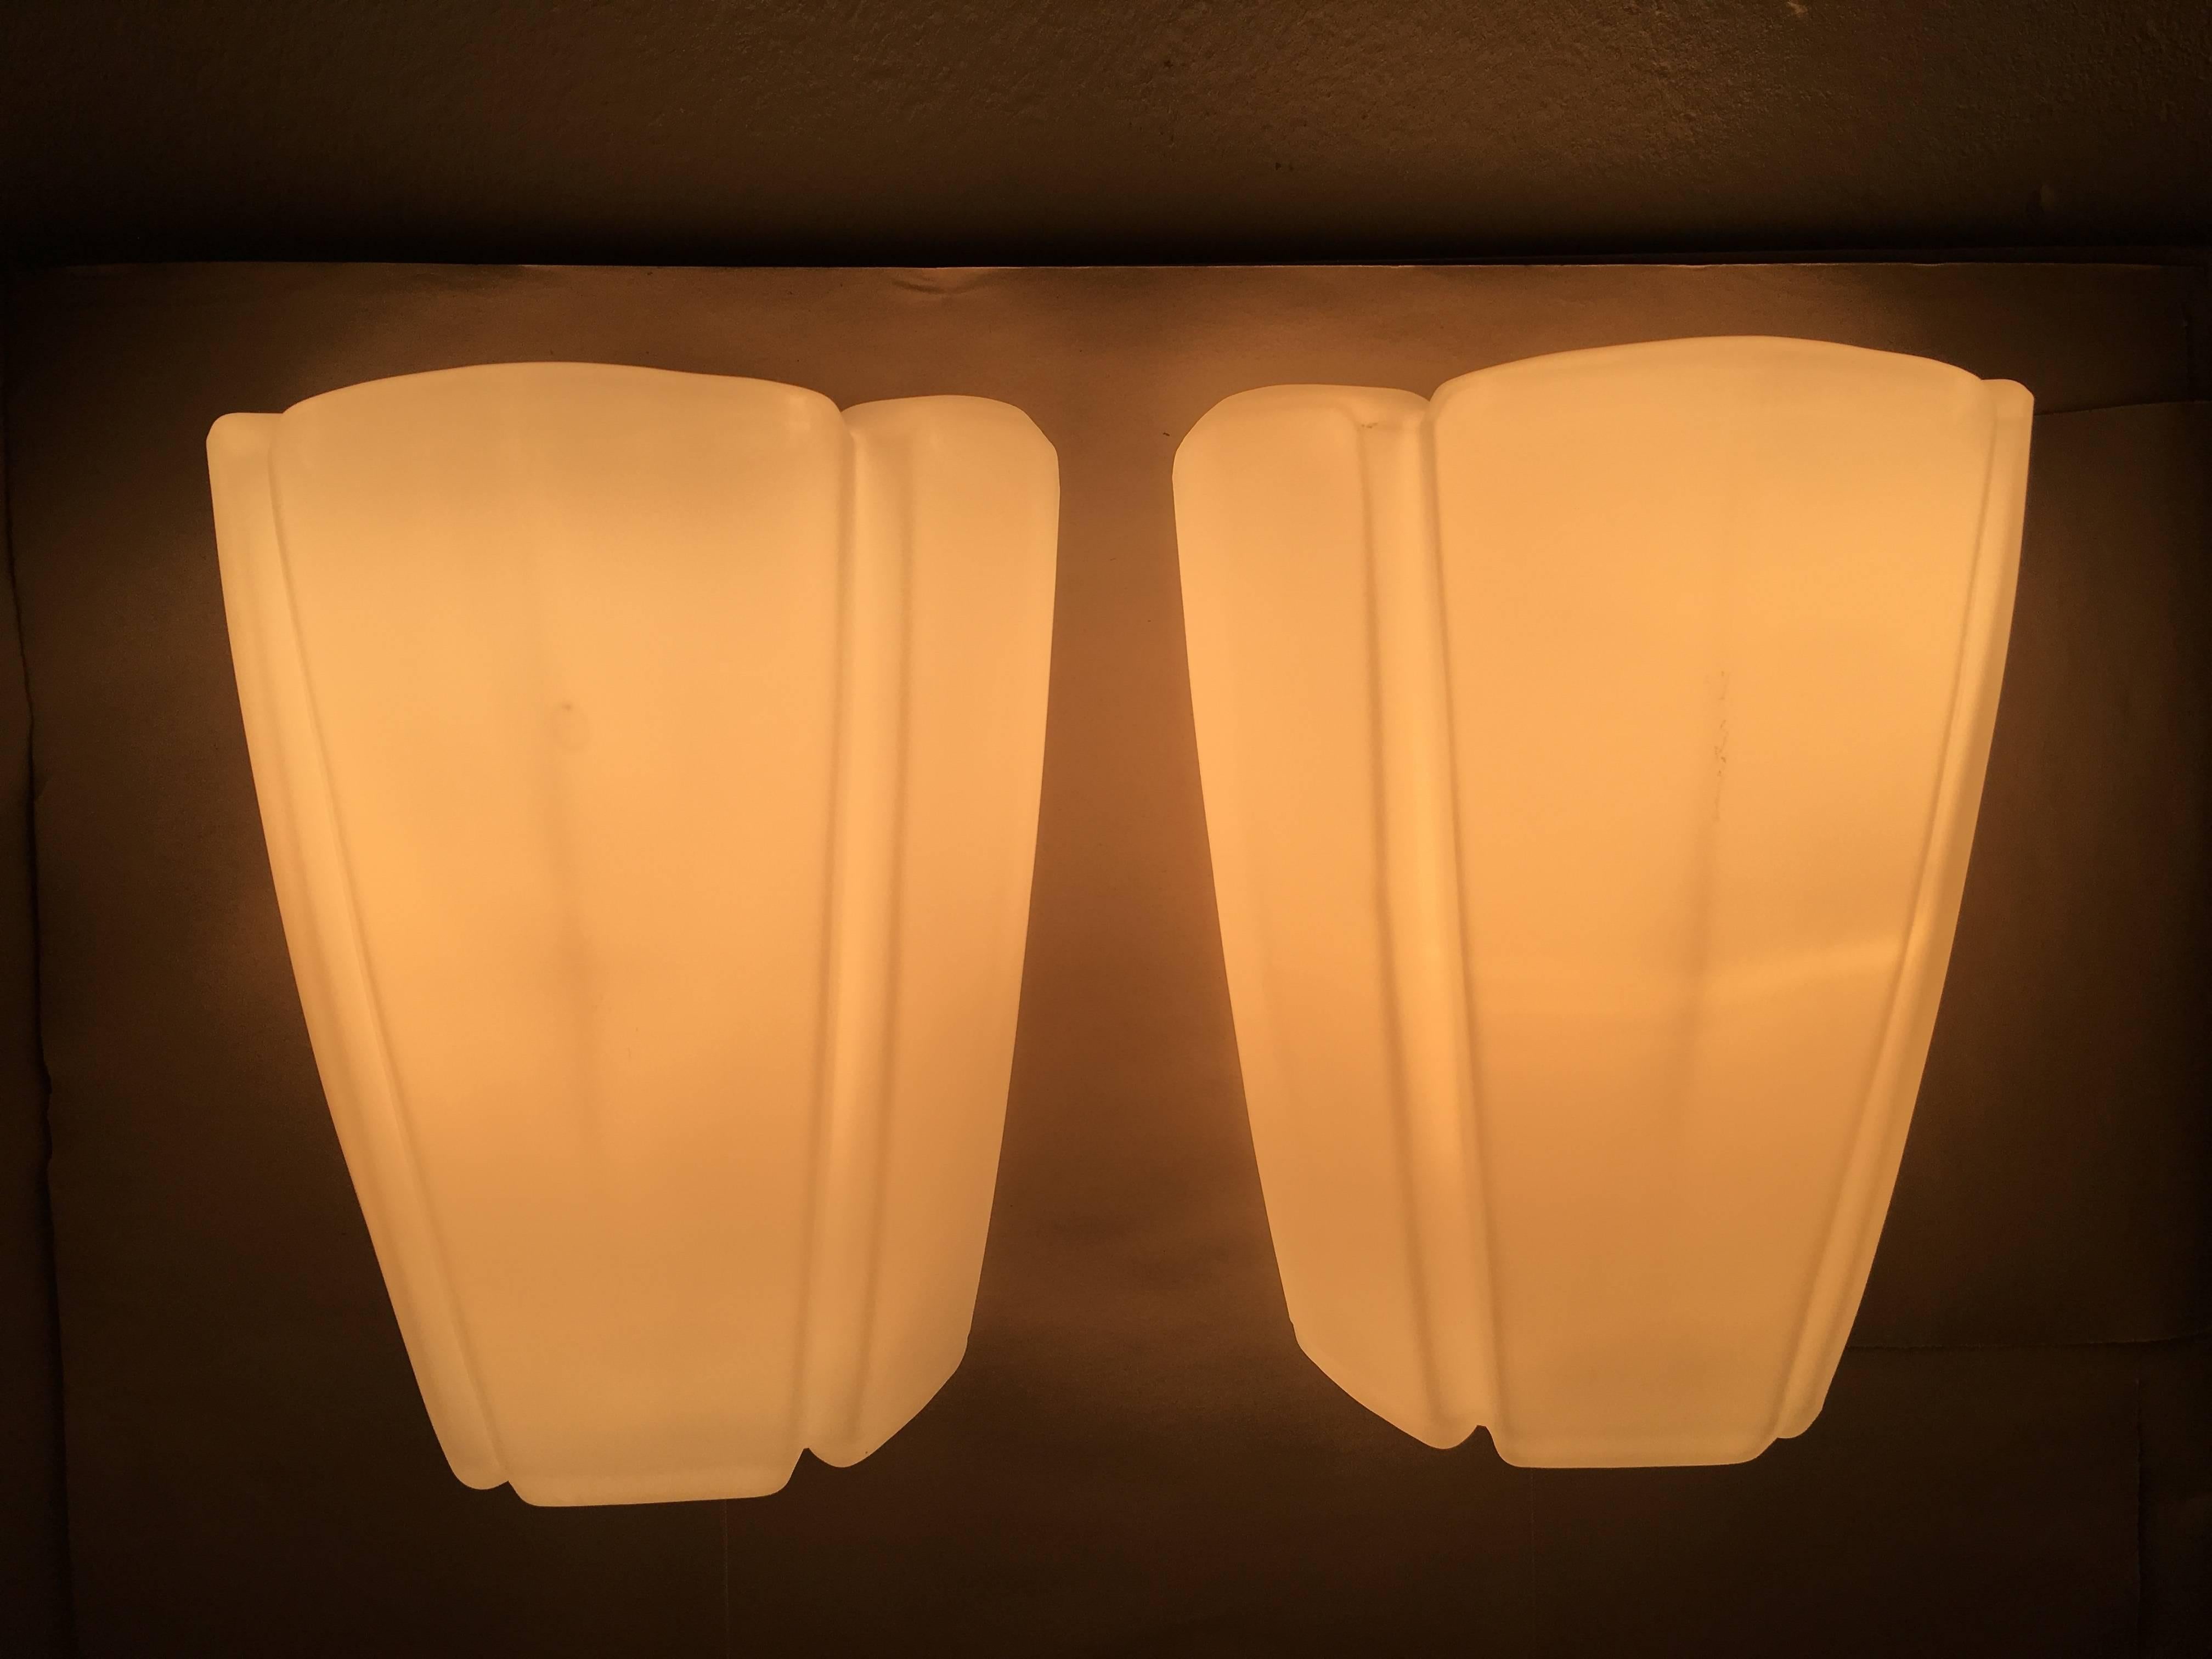 Pair of sconces by Glashutte Limburg Germany, in the rare milk glass version. In good, working condition with on / off switch in the lamp, it works by pulling on the cord. Rewired to meet U.S. standards. Each fixture requires one European E27 Edison